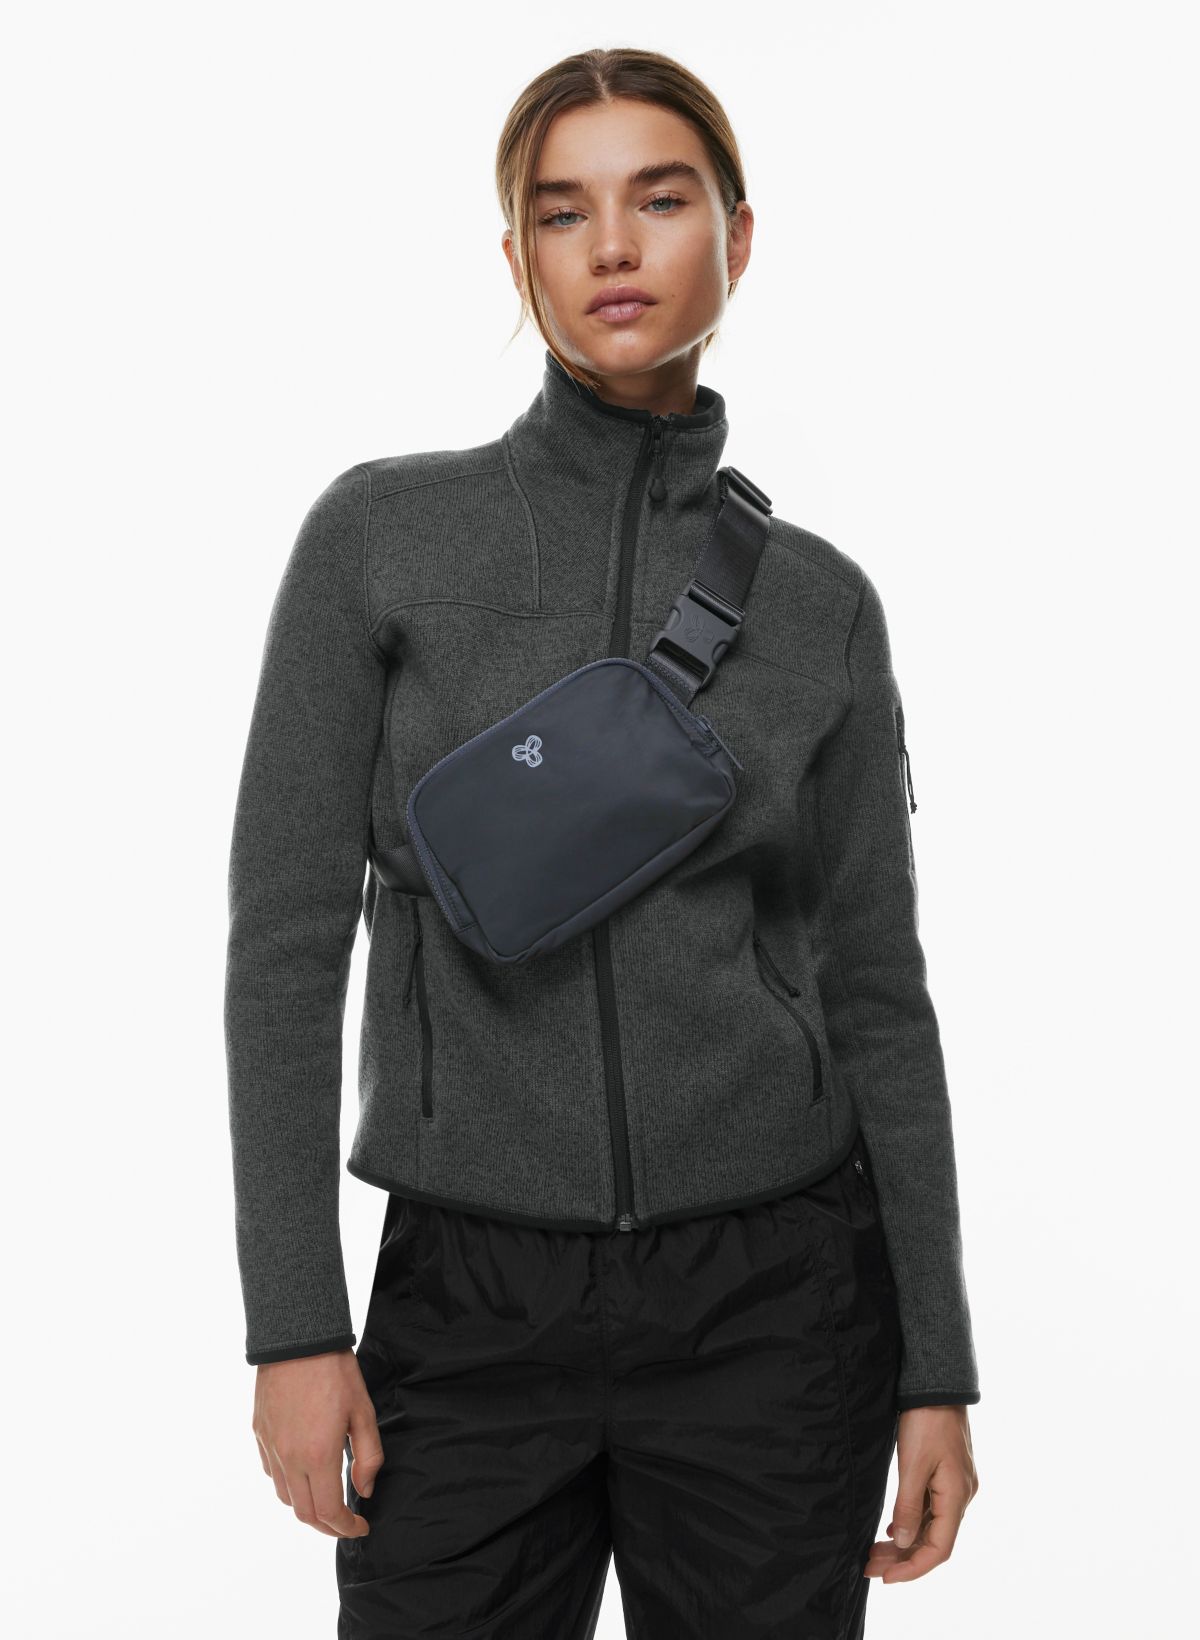 Lululemon bag - clothing & accessories - by owner - apparel sale